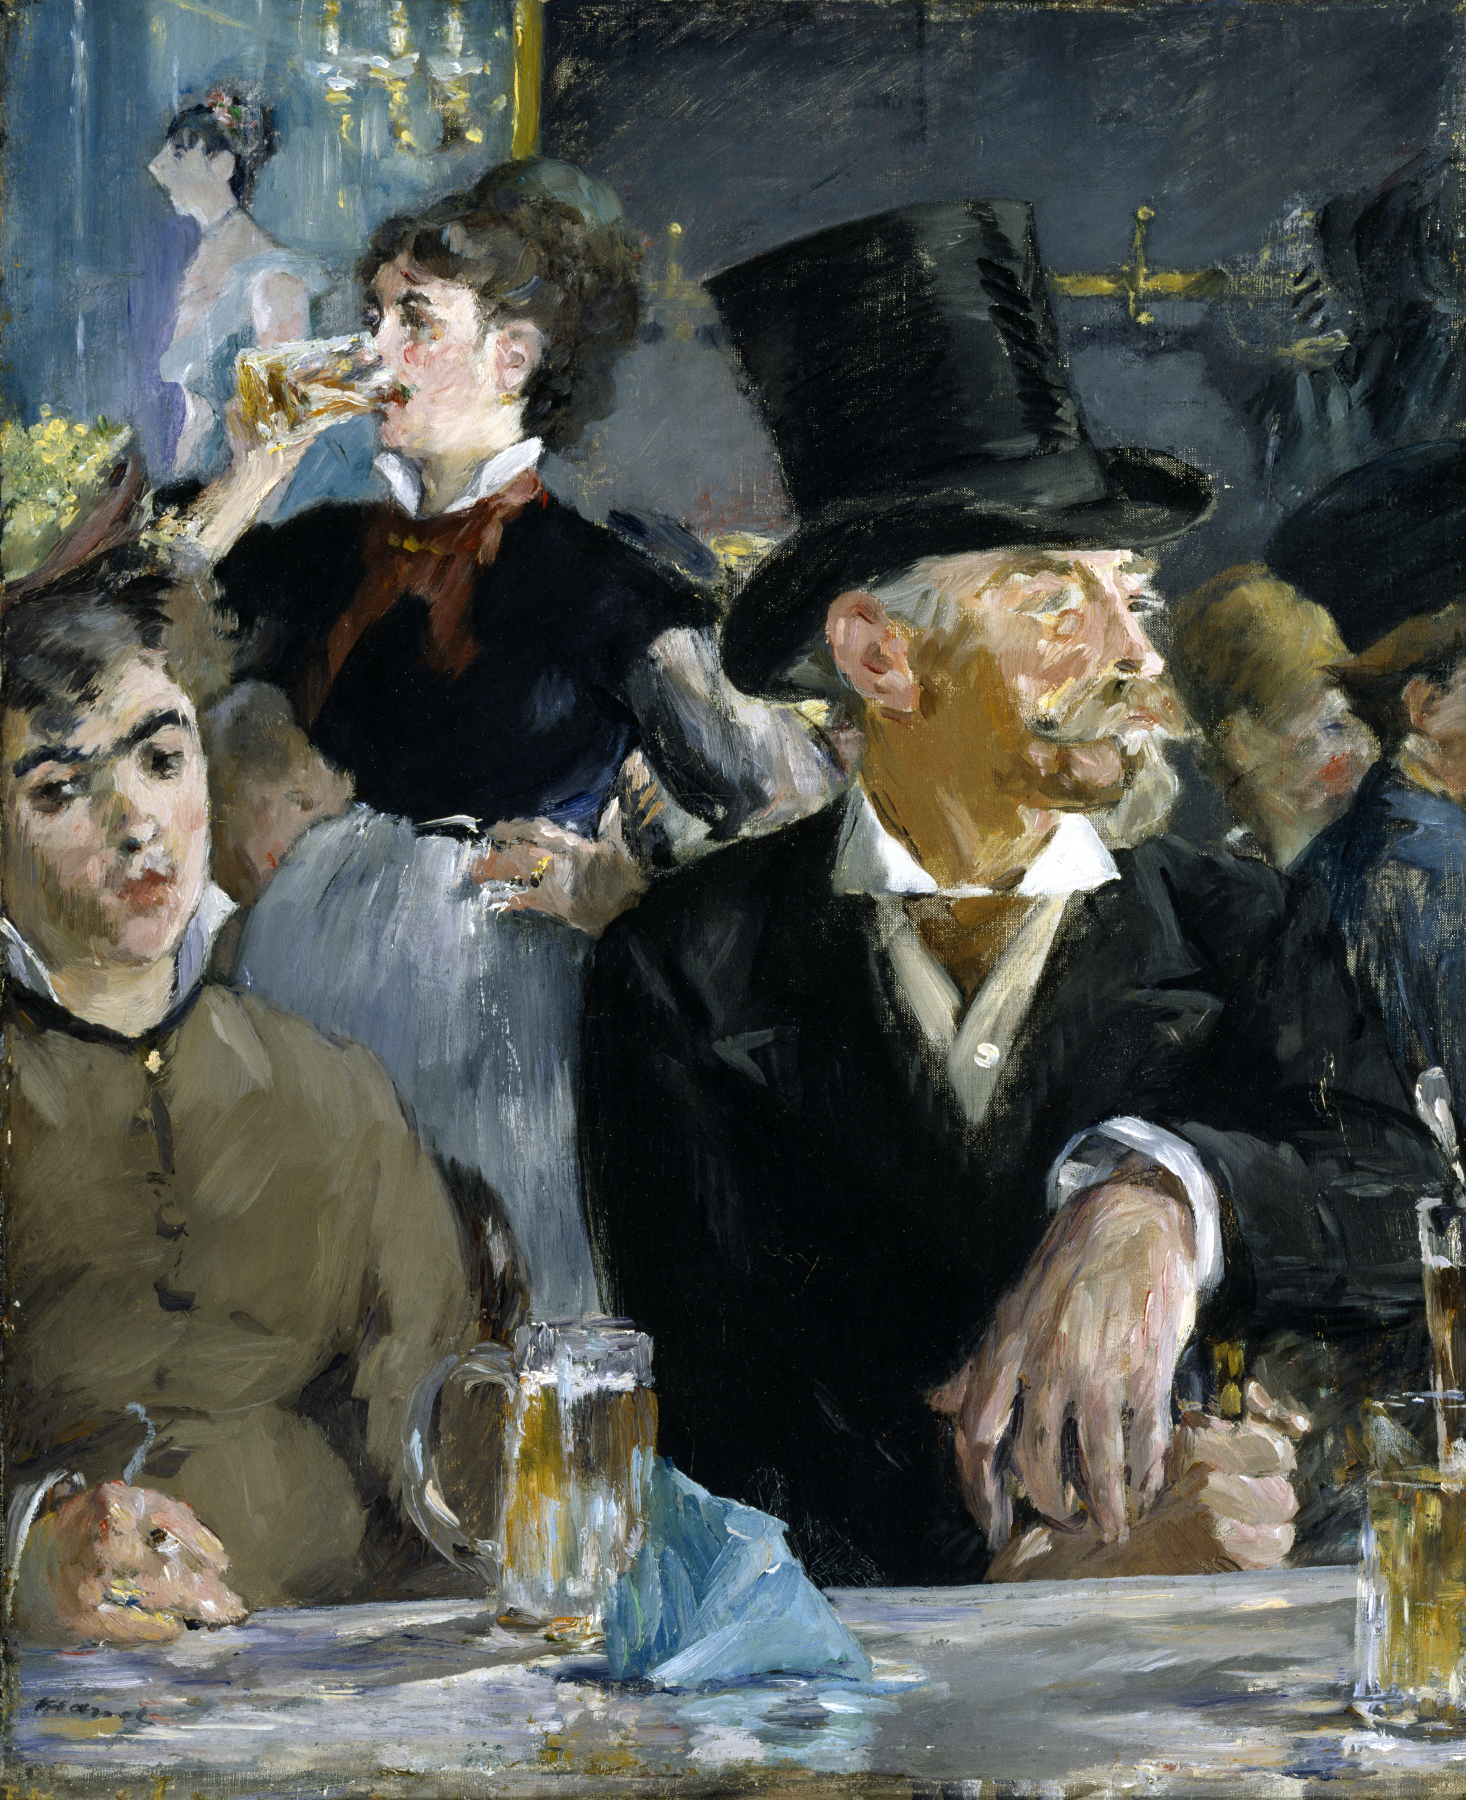 At the Café  by Édouard Manet - ca. 1879 - 58 x 47.3 in.  The Walters Art Museum